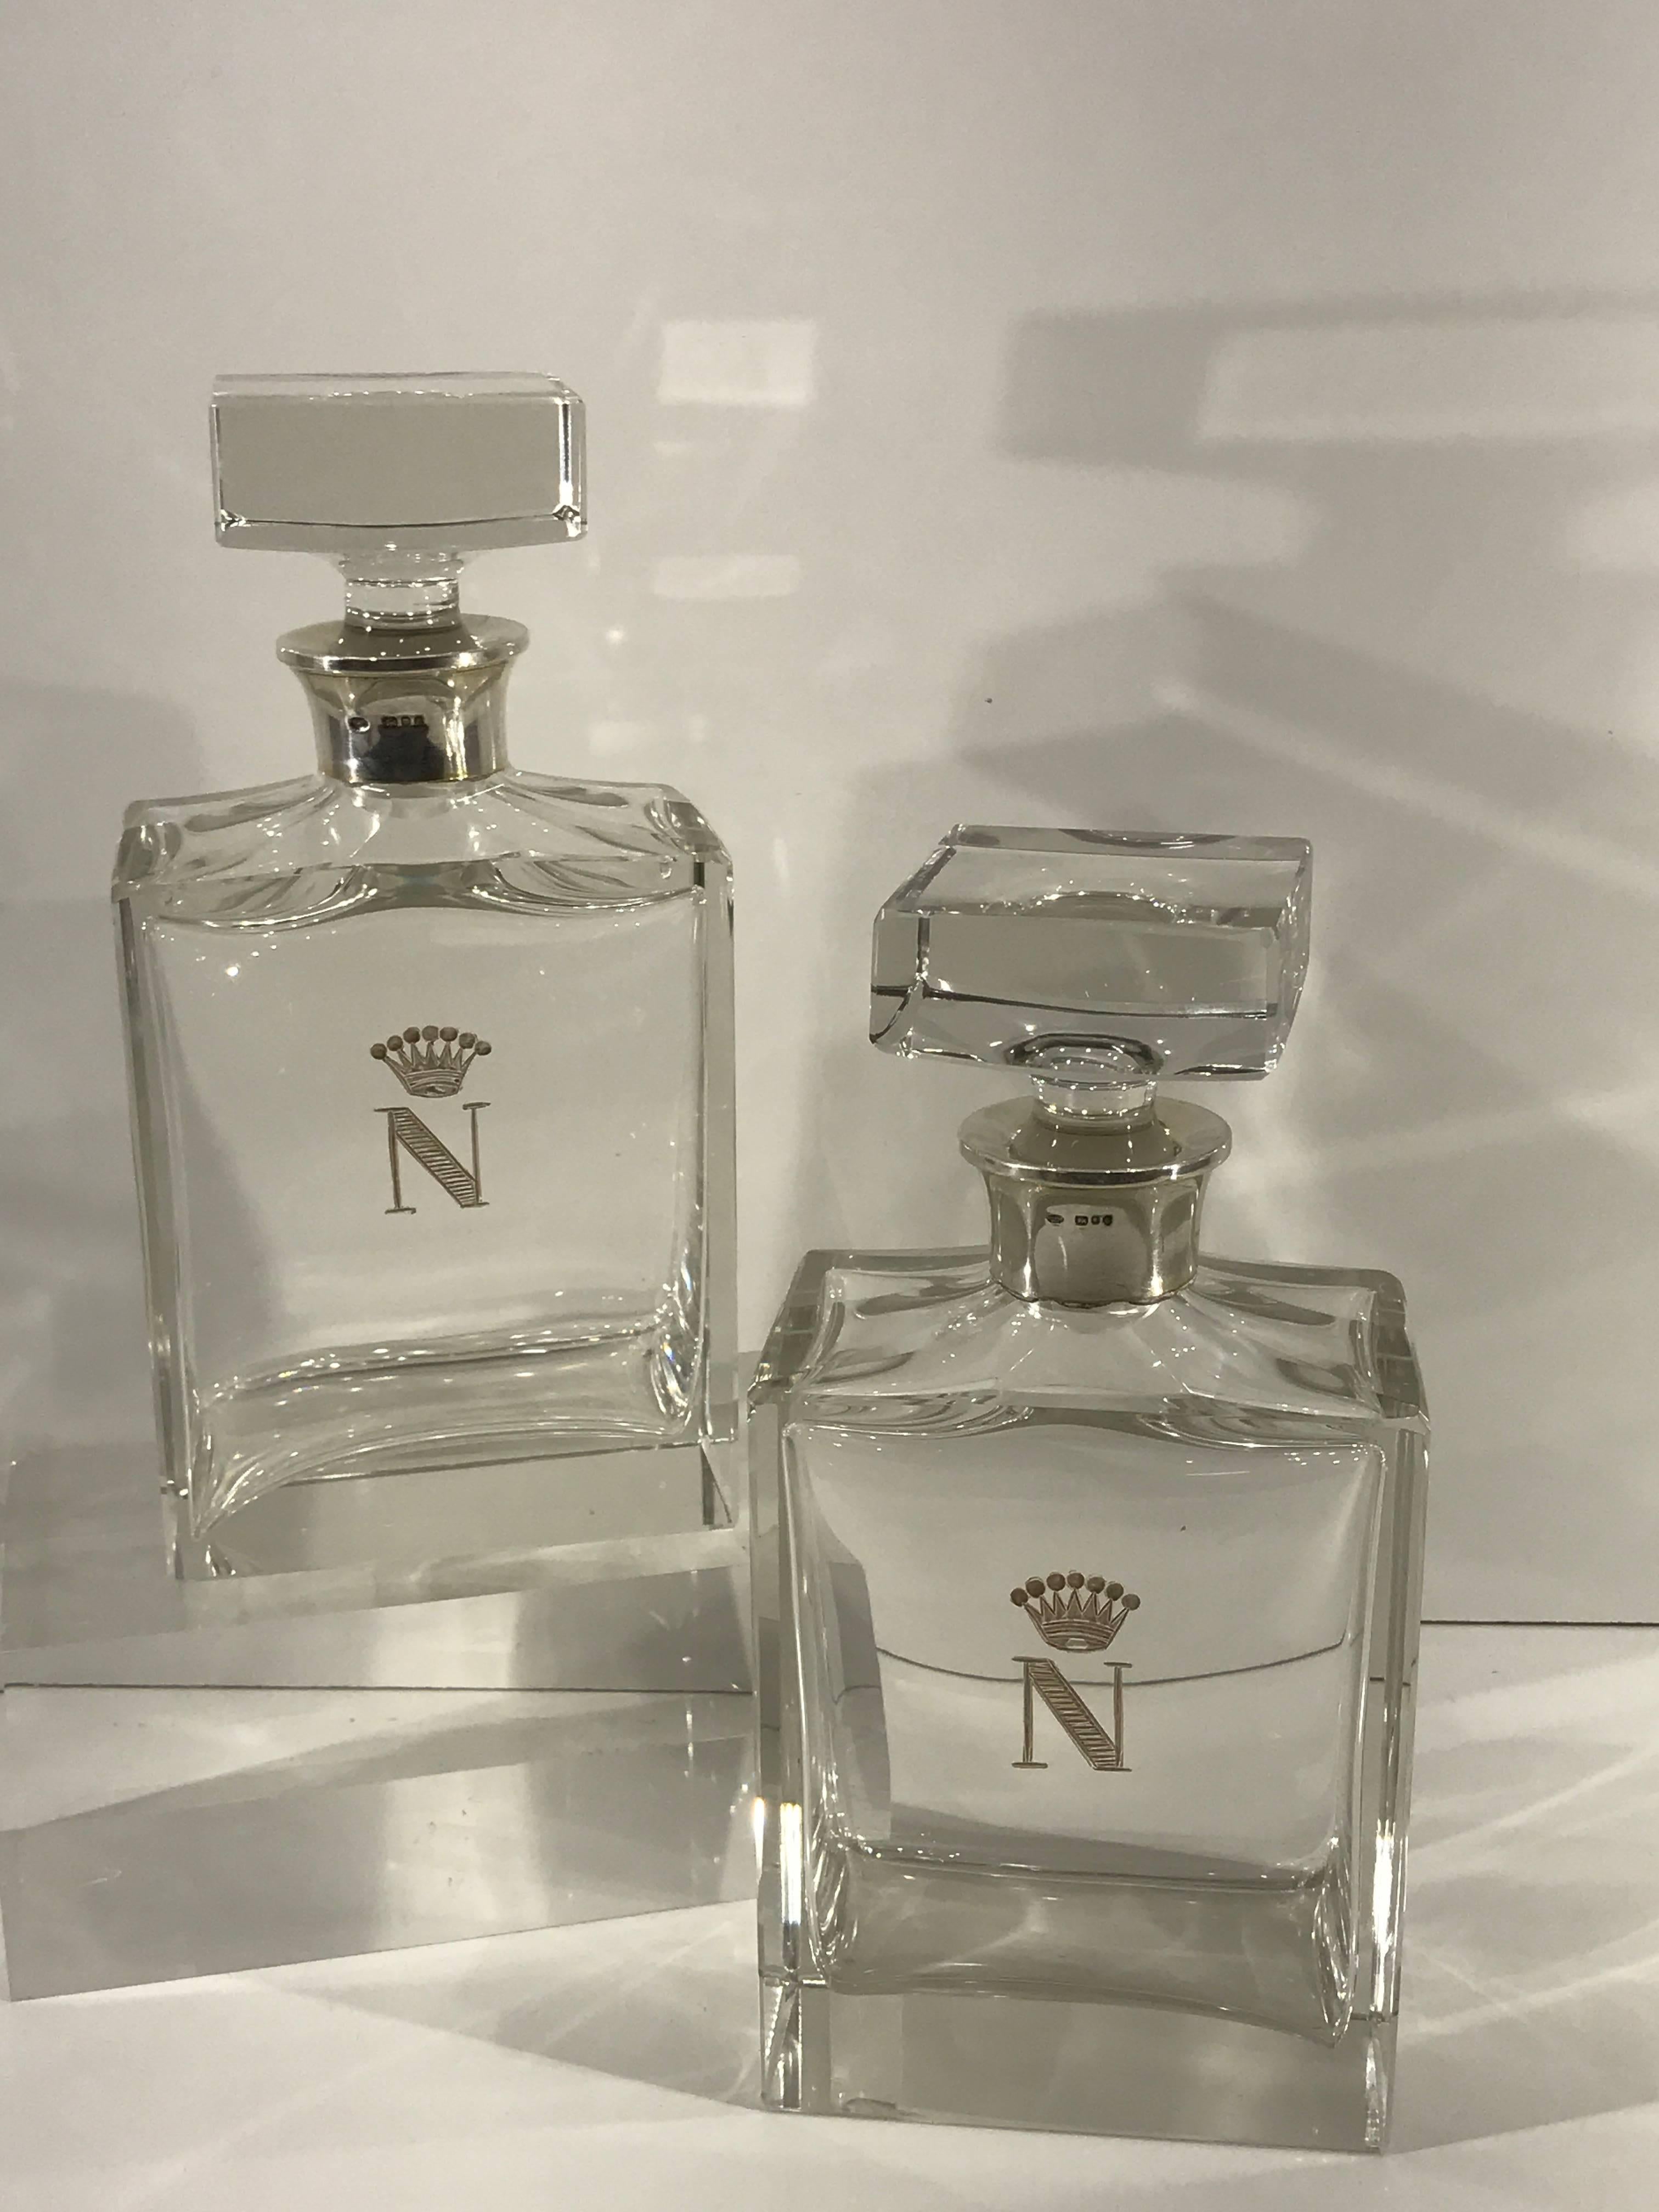 A pair of English sterling mounted crystal decanters with Napoleonic coat of arms. Each one of superb quality and substantial weight with 2.5-inch square stoppers, on a thick cut crystal sterling mounted bottles. Hallmarked for London, 1979, Stamped